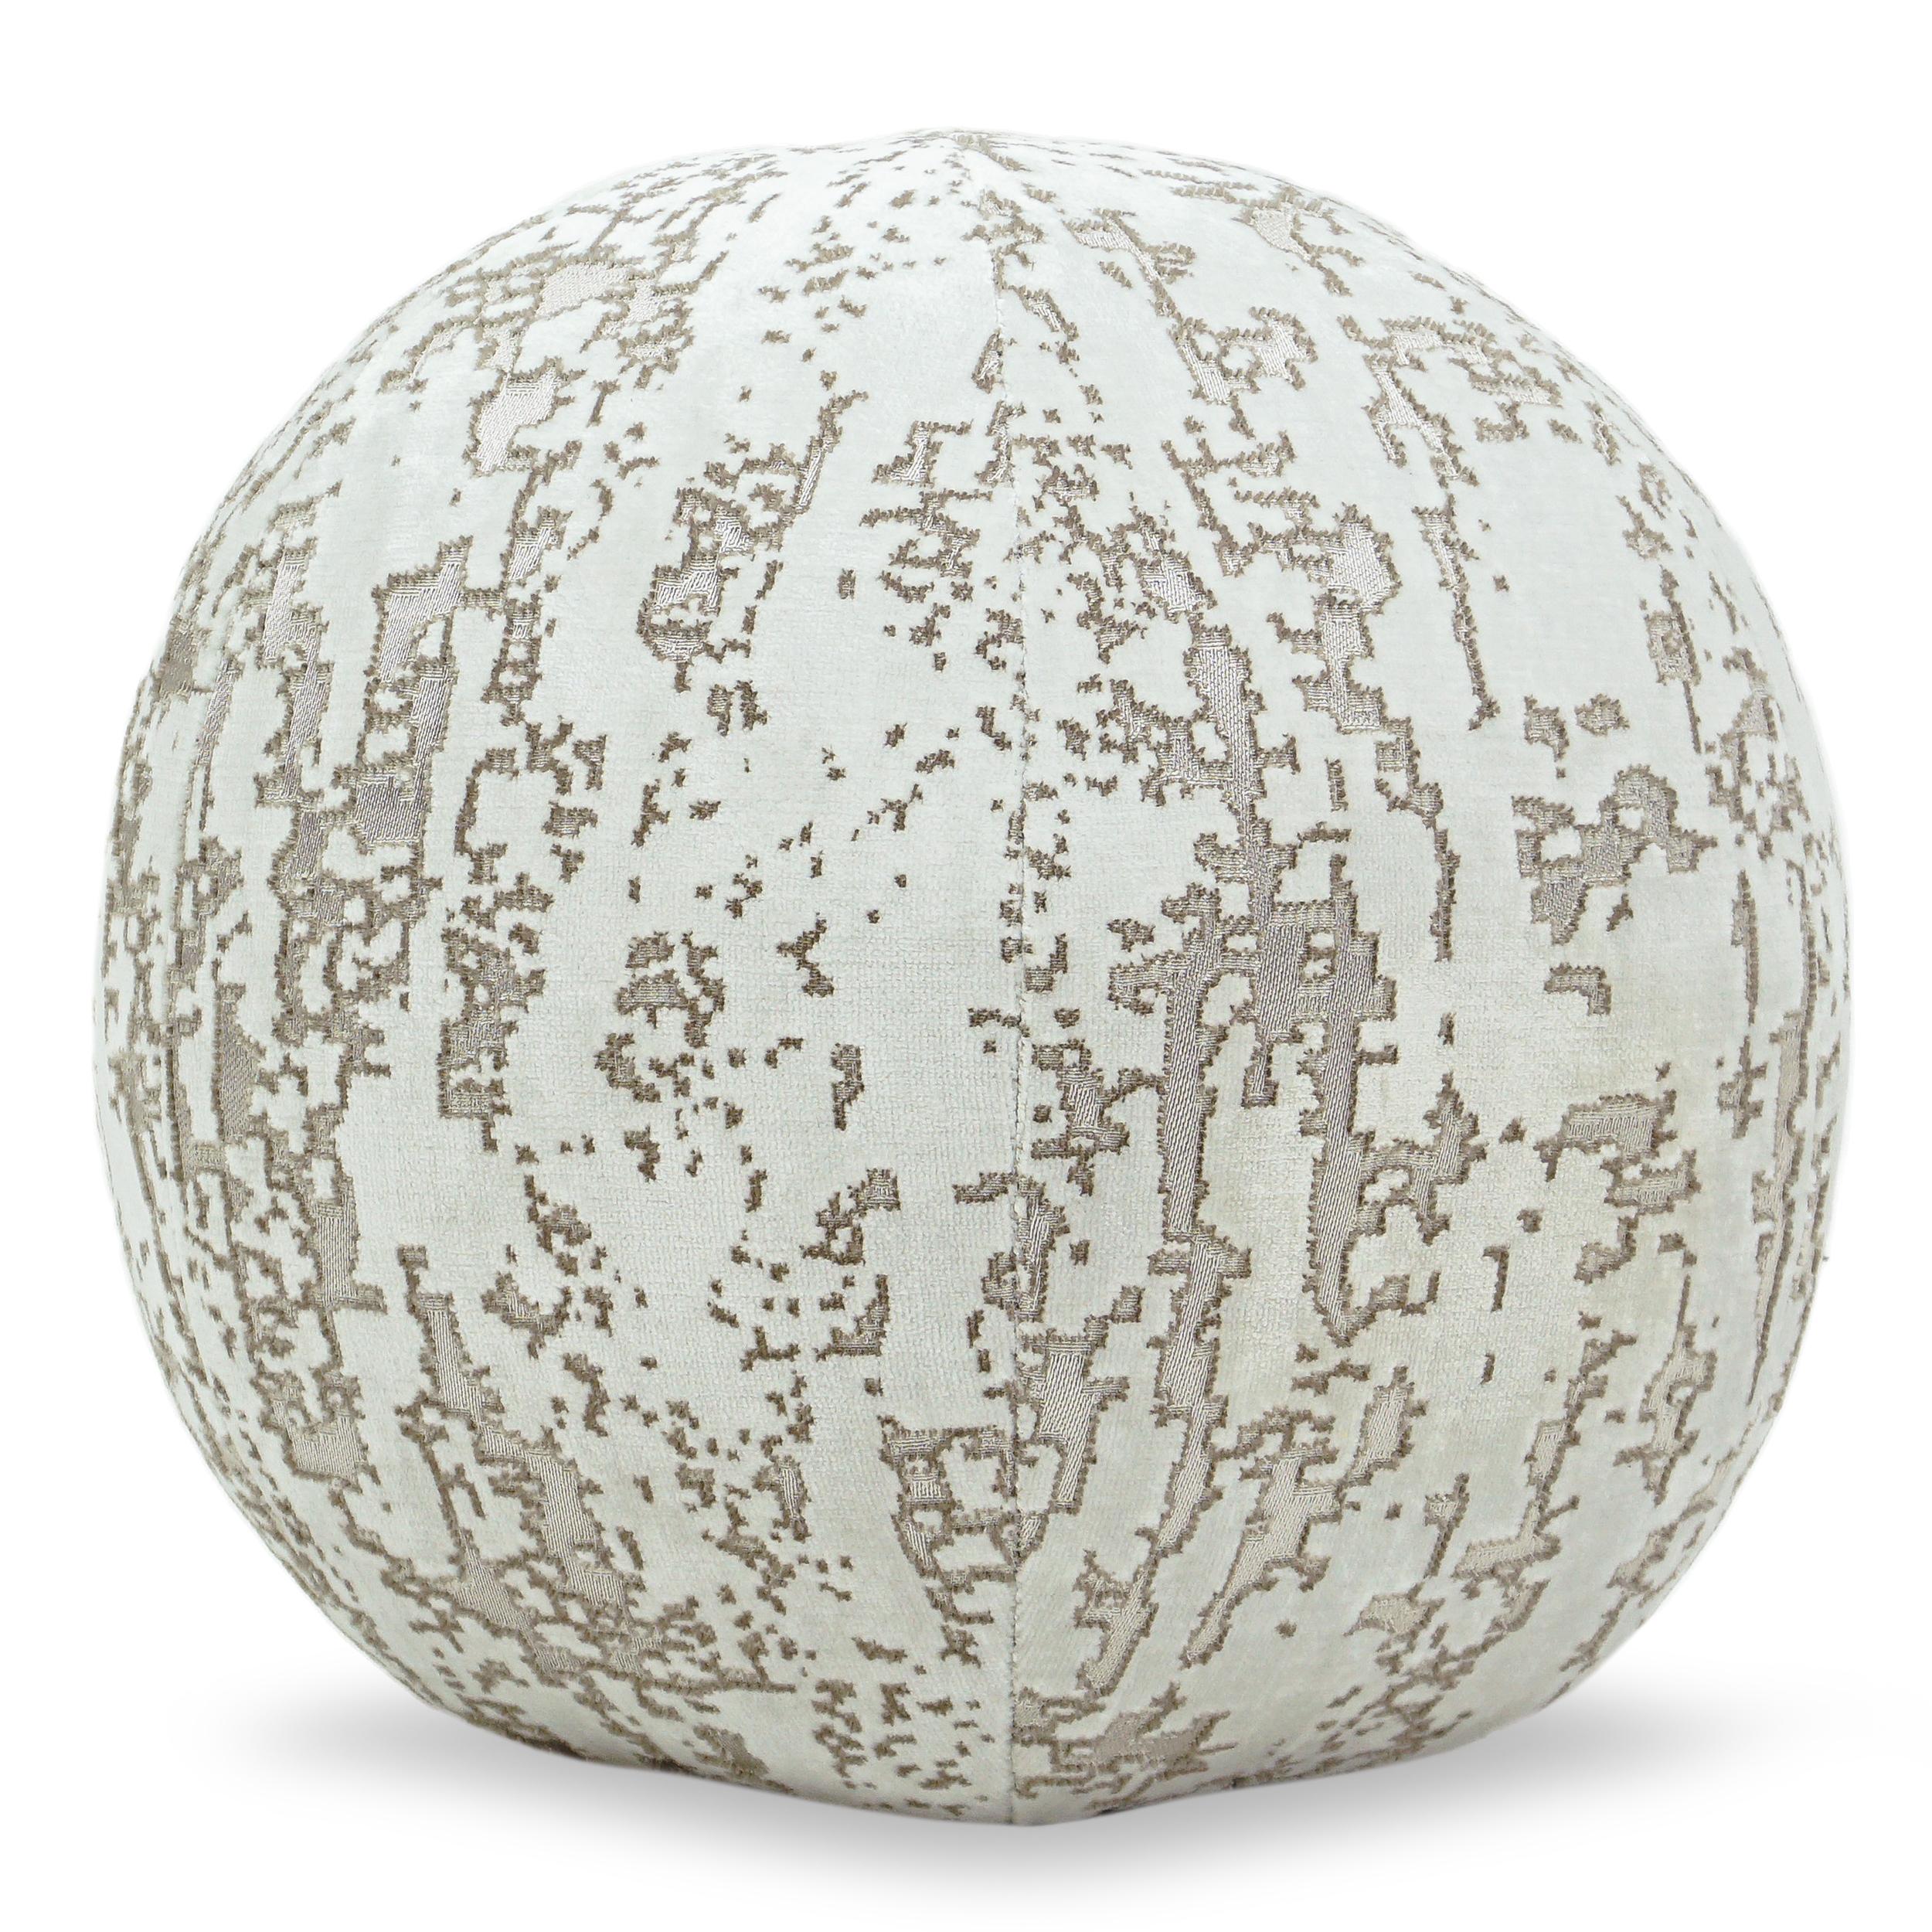 Cut Velvet Ball Pillow In New Condition For Sale In Greenwich, CT